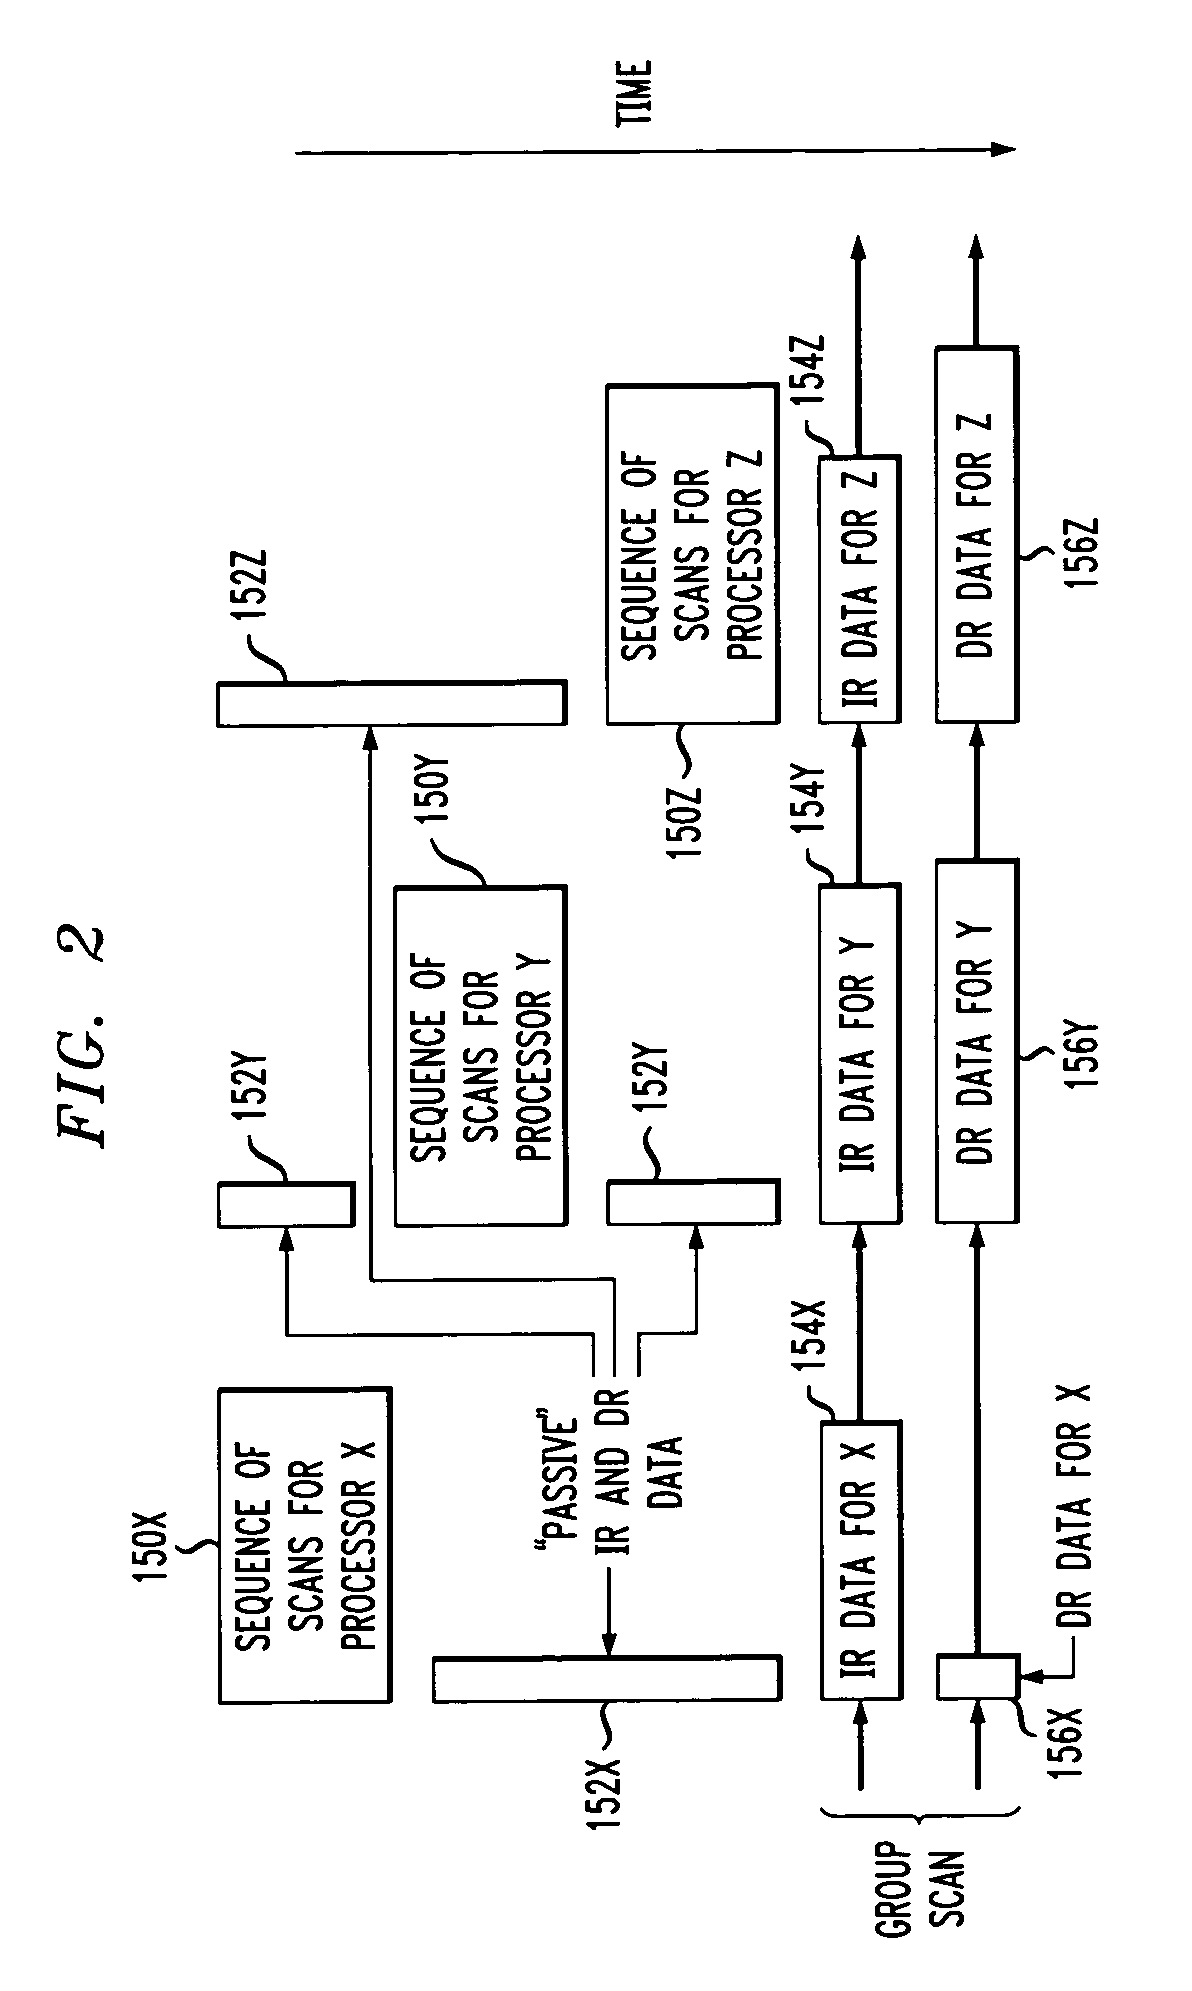 Control method and apparatus for testing of multiple processor integrated circuits and other digital systems